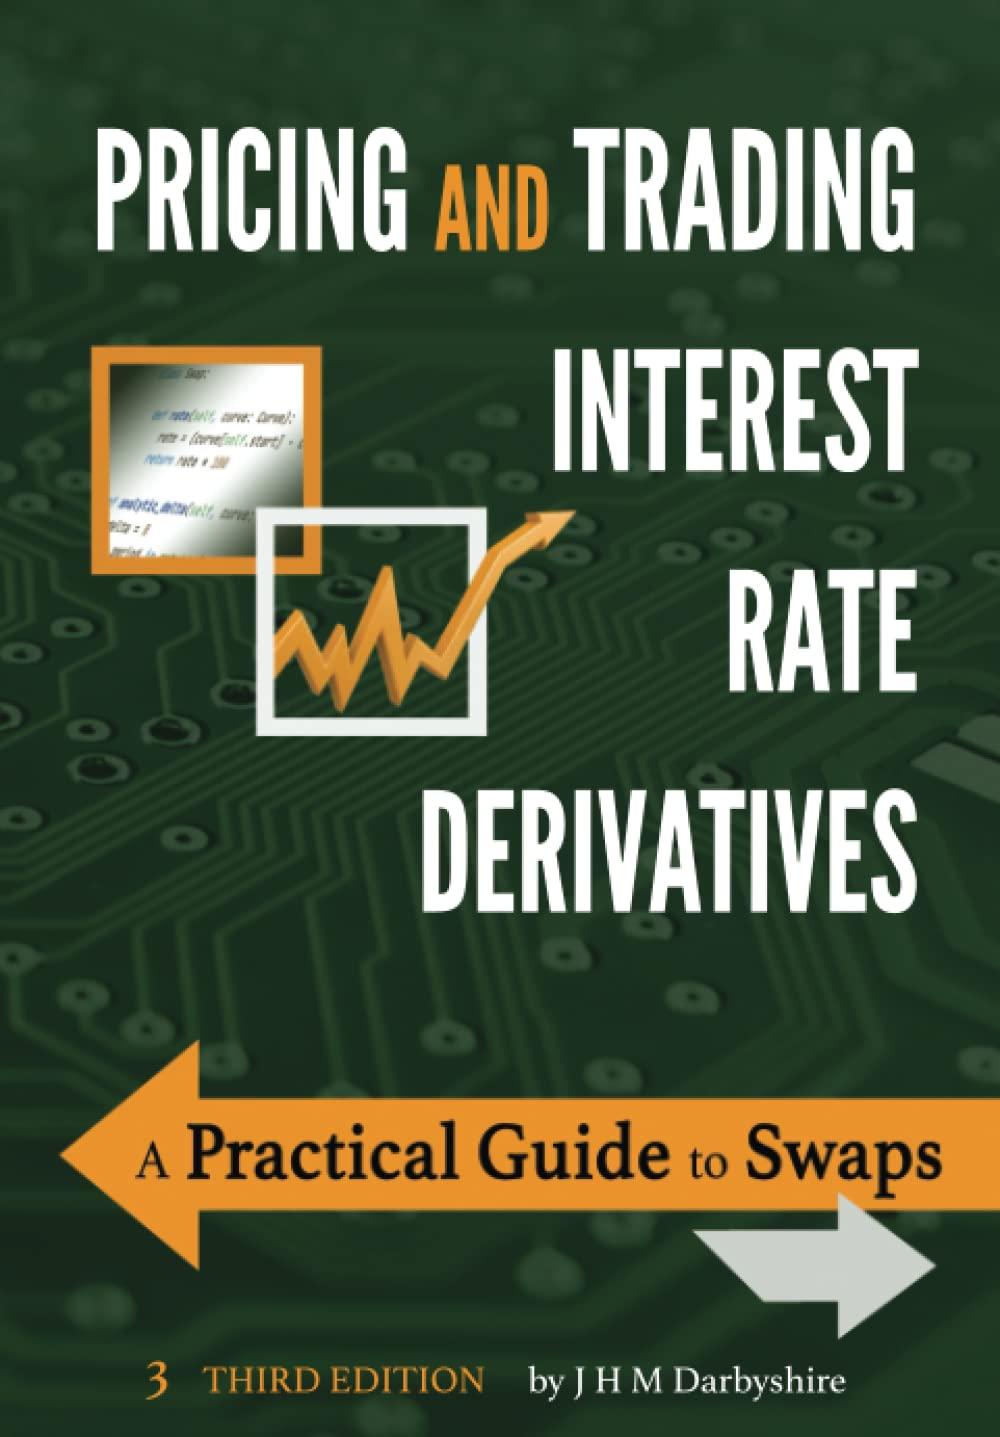 pricing and trading interest rate derivatives 3rd edition j hamish m darbyshire 0995455538, 978-0995455535